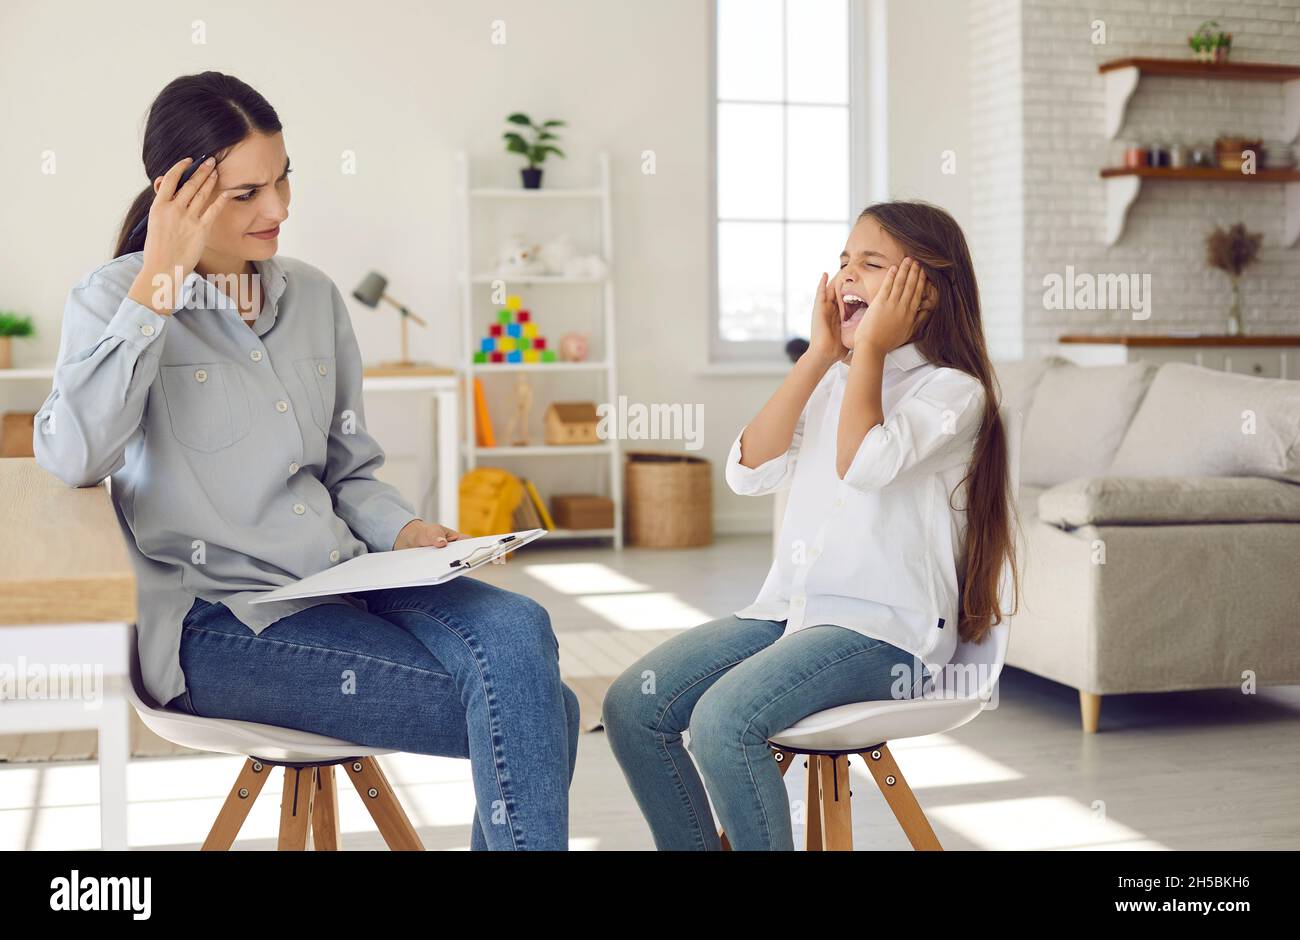 Angry naughty child throwing tantrum during session with therapist or psychologist Stock Photo